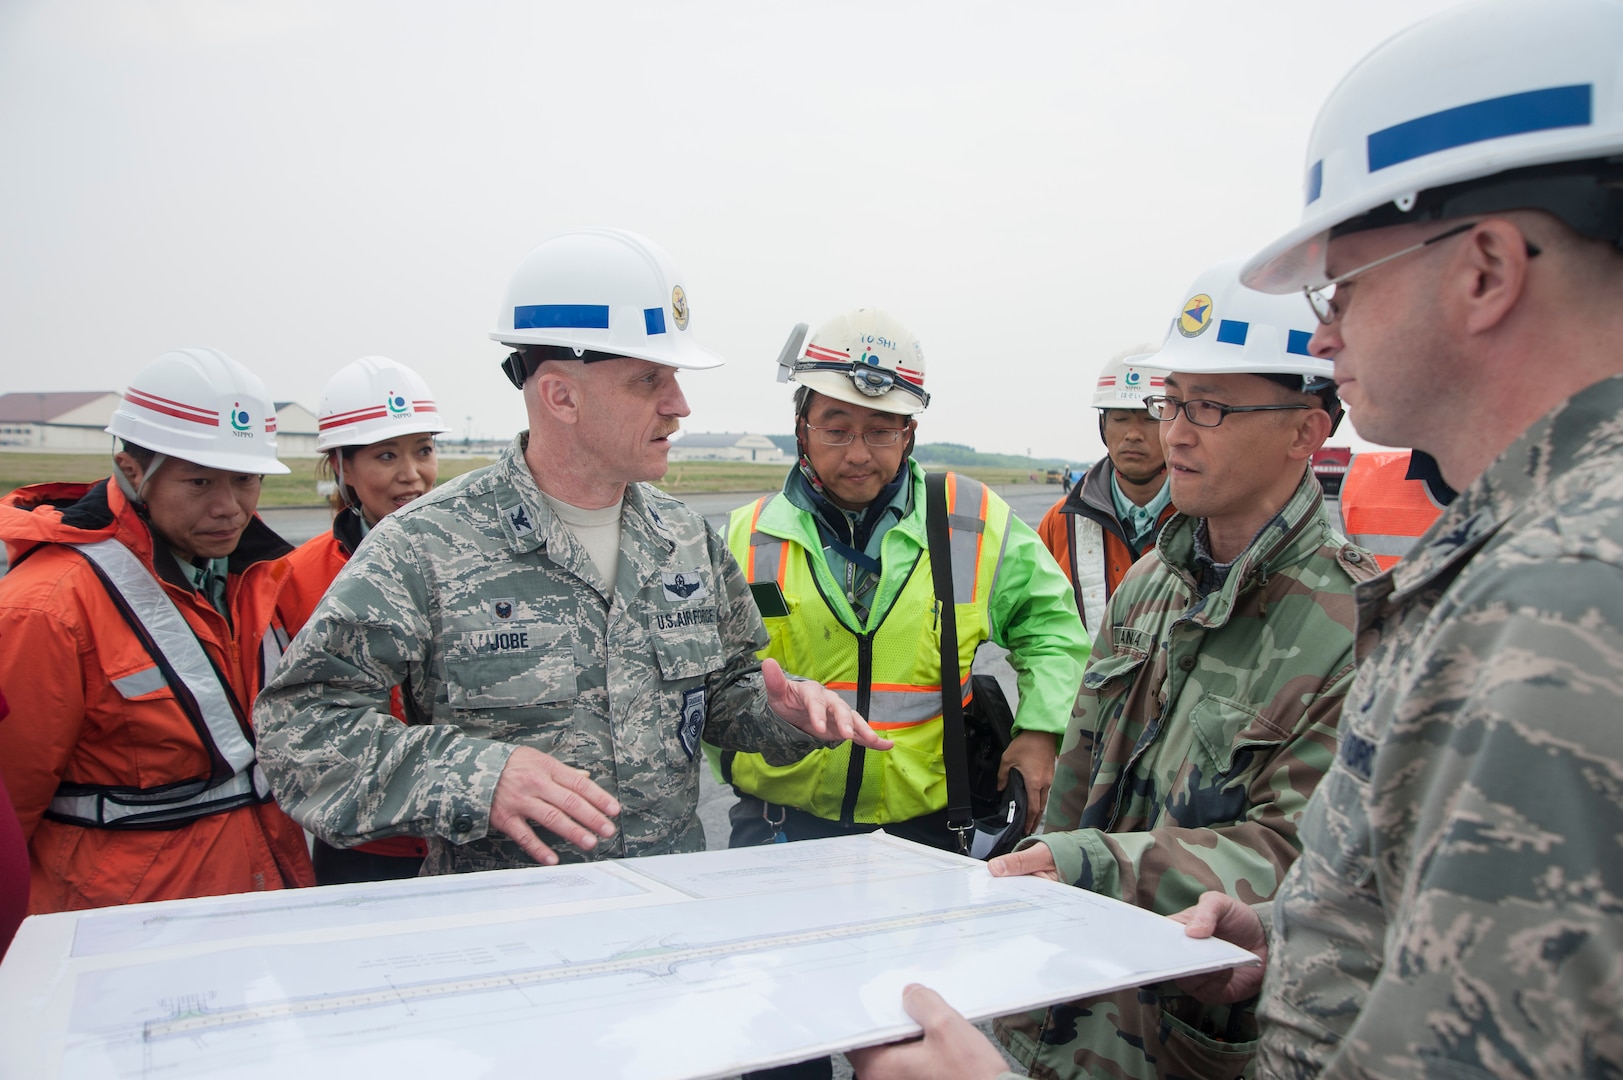 U.S. Air Force Col. R. Scott Jobe, the 35th Fighter Wing commander, discusses construction plans with site leads at Misawa Air Base, Japan, May 25, 2017. The squadron reconstructed a large portion of the runway to further enhance mission quality. (U.S. Air Force photo by Staff Sgt. Melanie Hutto)